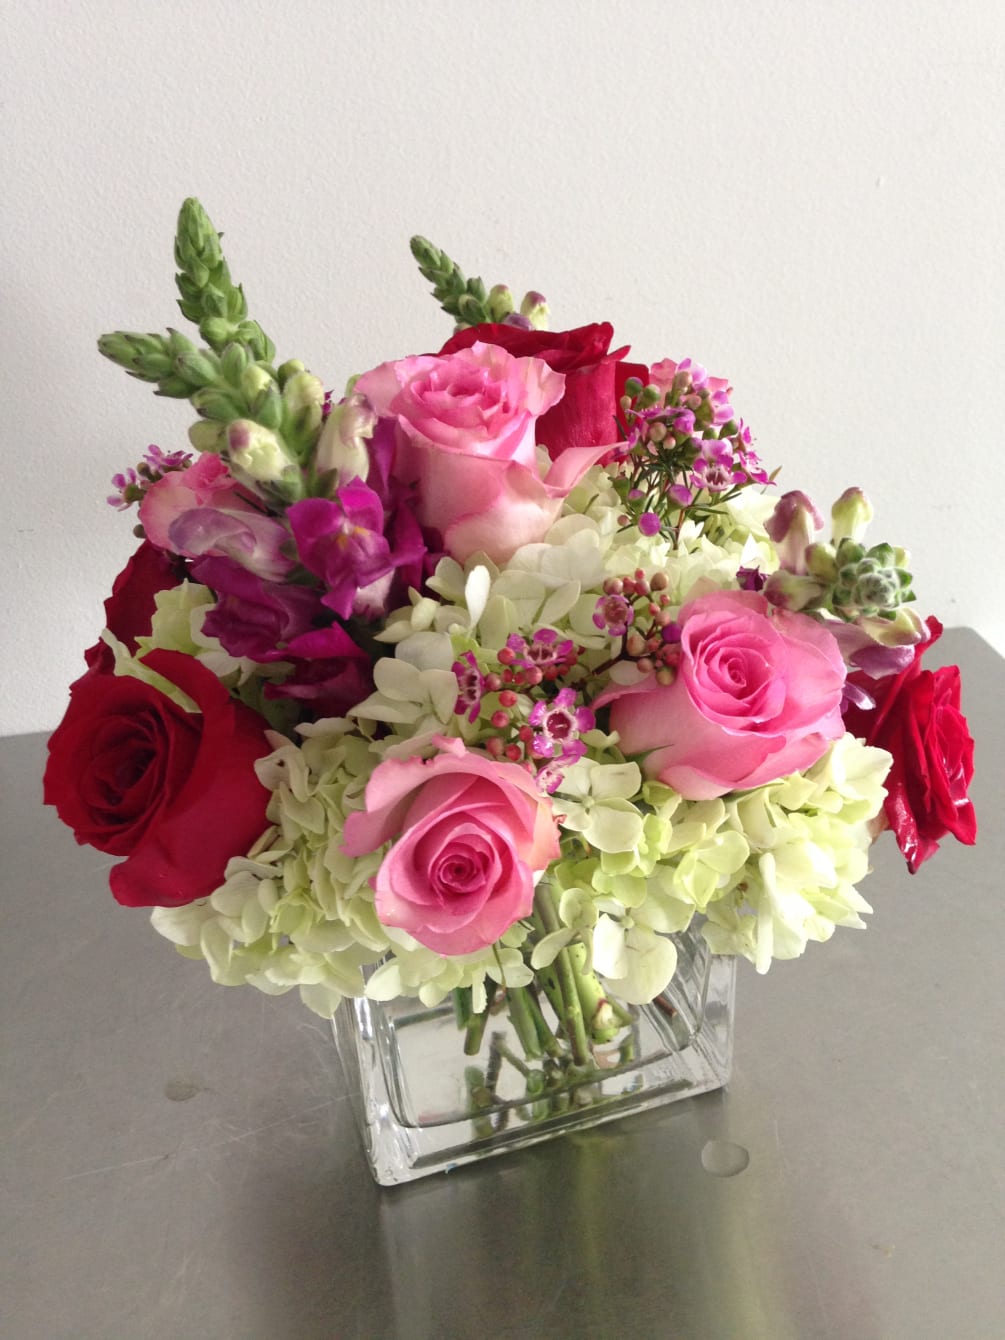 To celebrate love, a collection of roses, hydrengeas and snapdragons in a